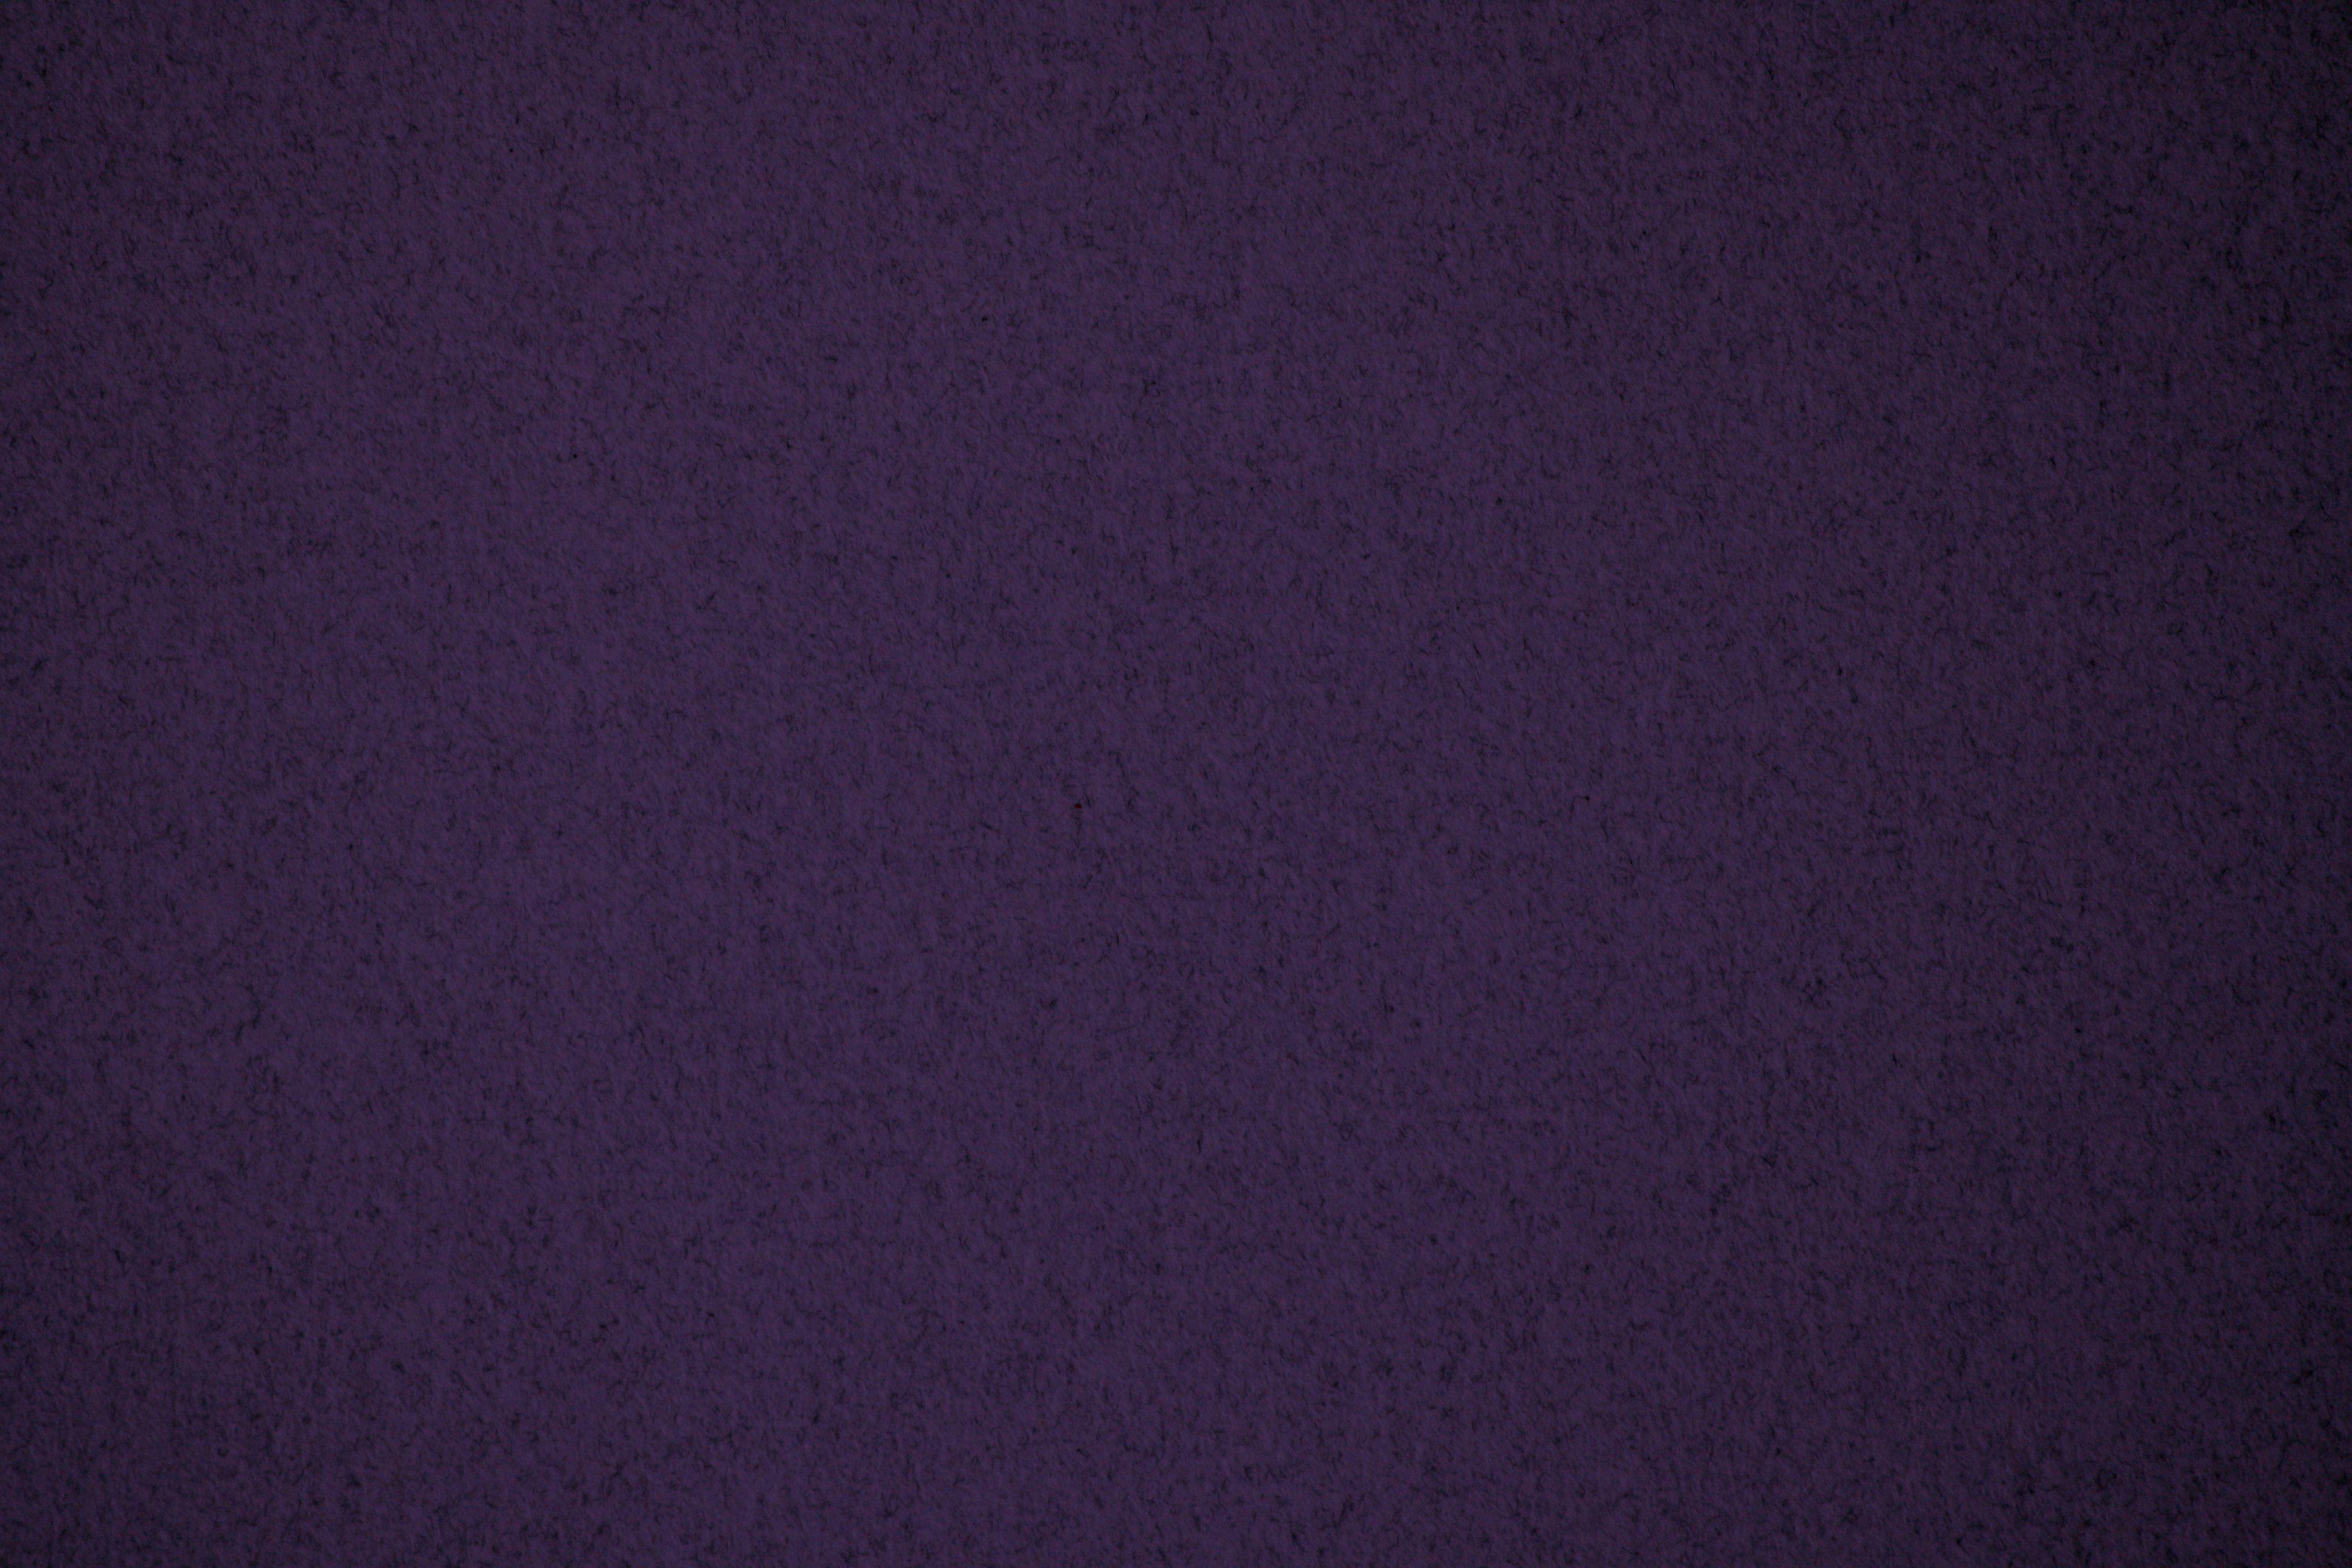 Dark Purple Speckled Paper Texture Picture. Free Photograph